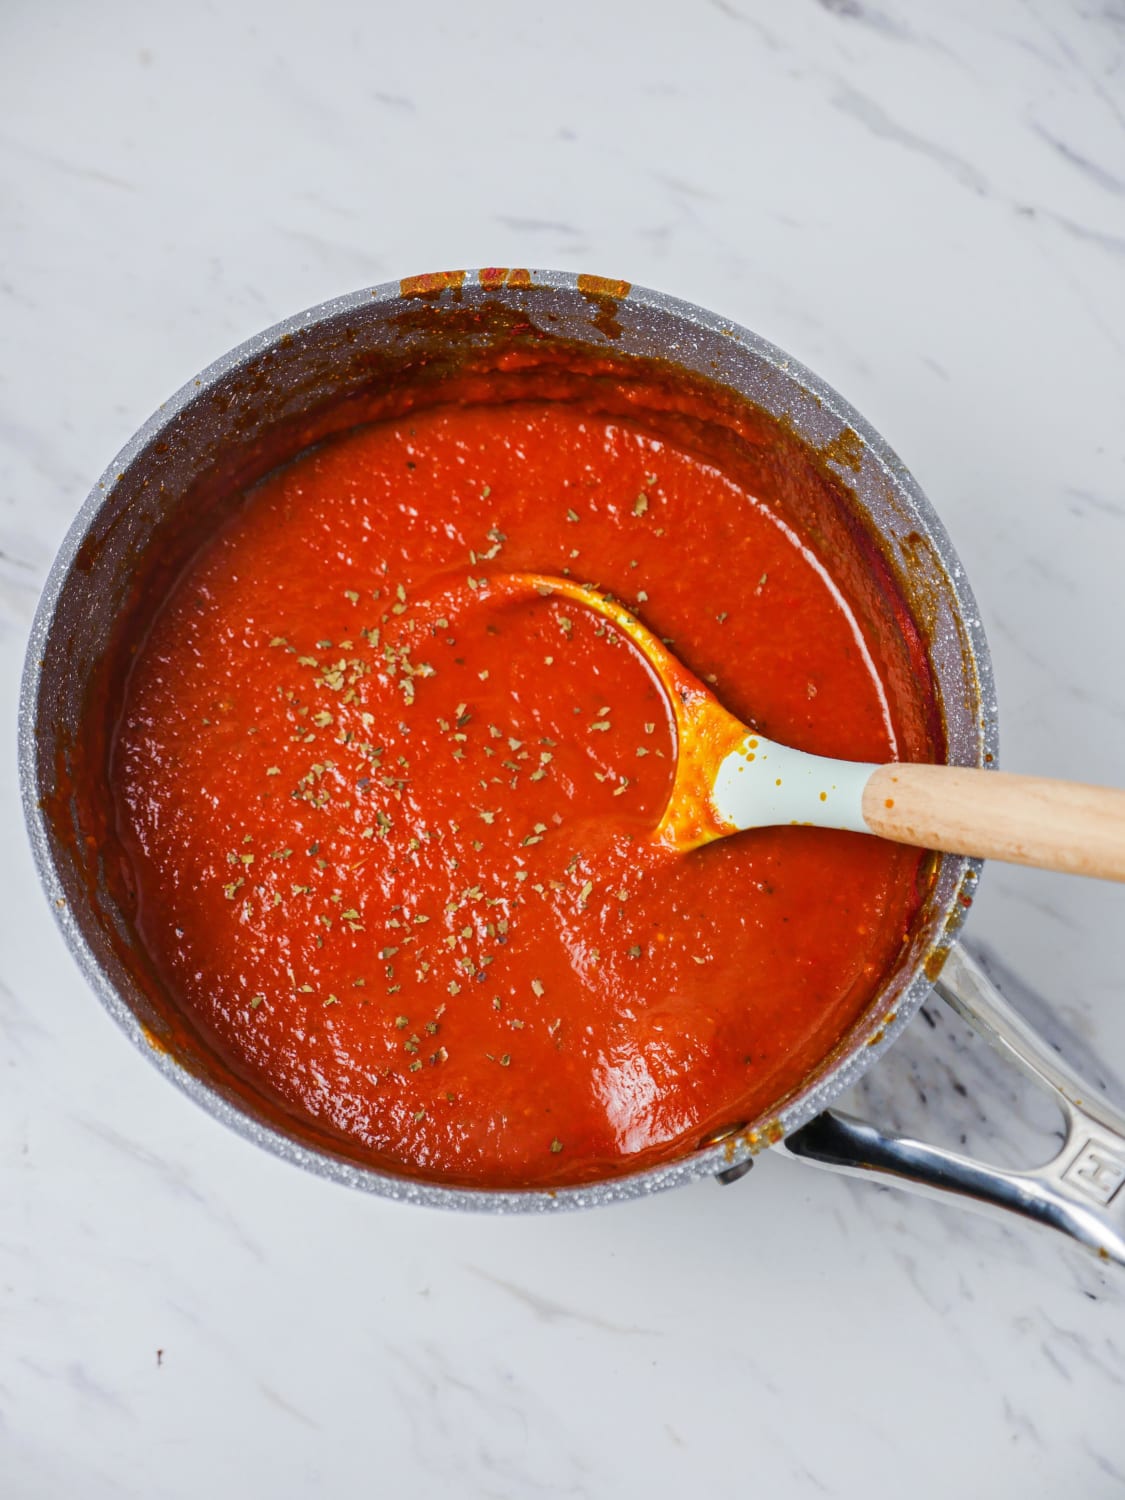 My Italian mother shared her pasta sauce recipe with me so I could share with you so you can stop buying store bought crap!